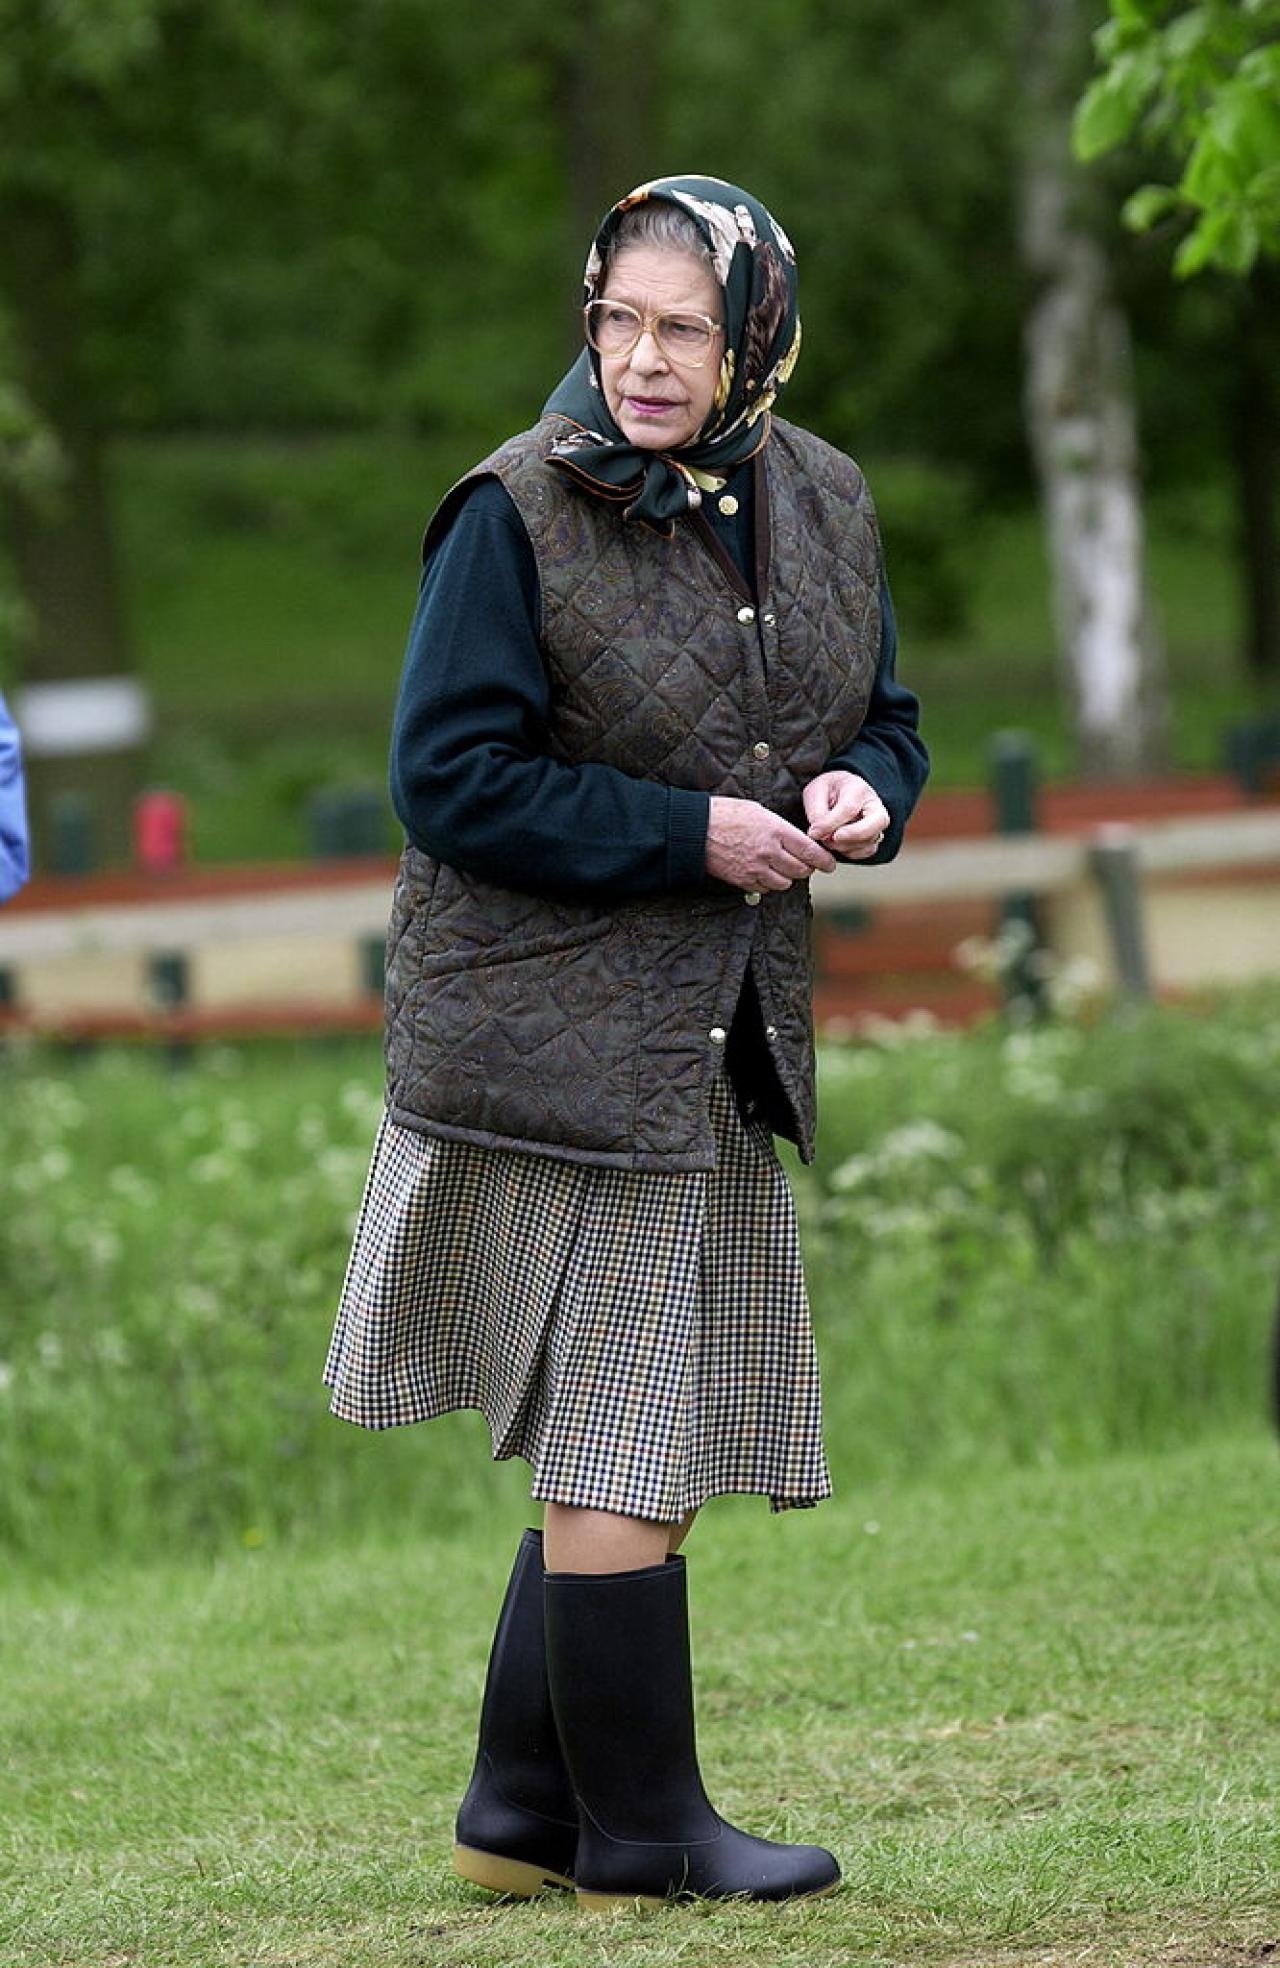 UNITED KINGDOM - MAY 18:  Queen Elizabeth Ll, Dressed Casually In A Wool Skirt, Body Warmer And Wellington Boots, As She Walks Through The Grounds Of Windsor Great Park During The Royal Windsor Horse Show.  (Photo by Tim Graham Picture Library/Getty Images)